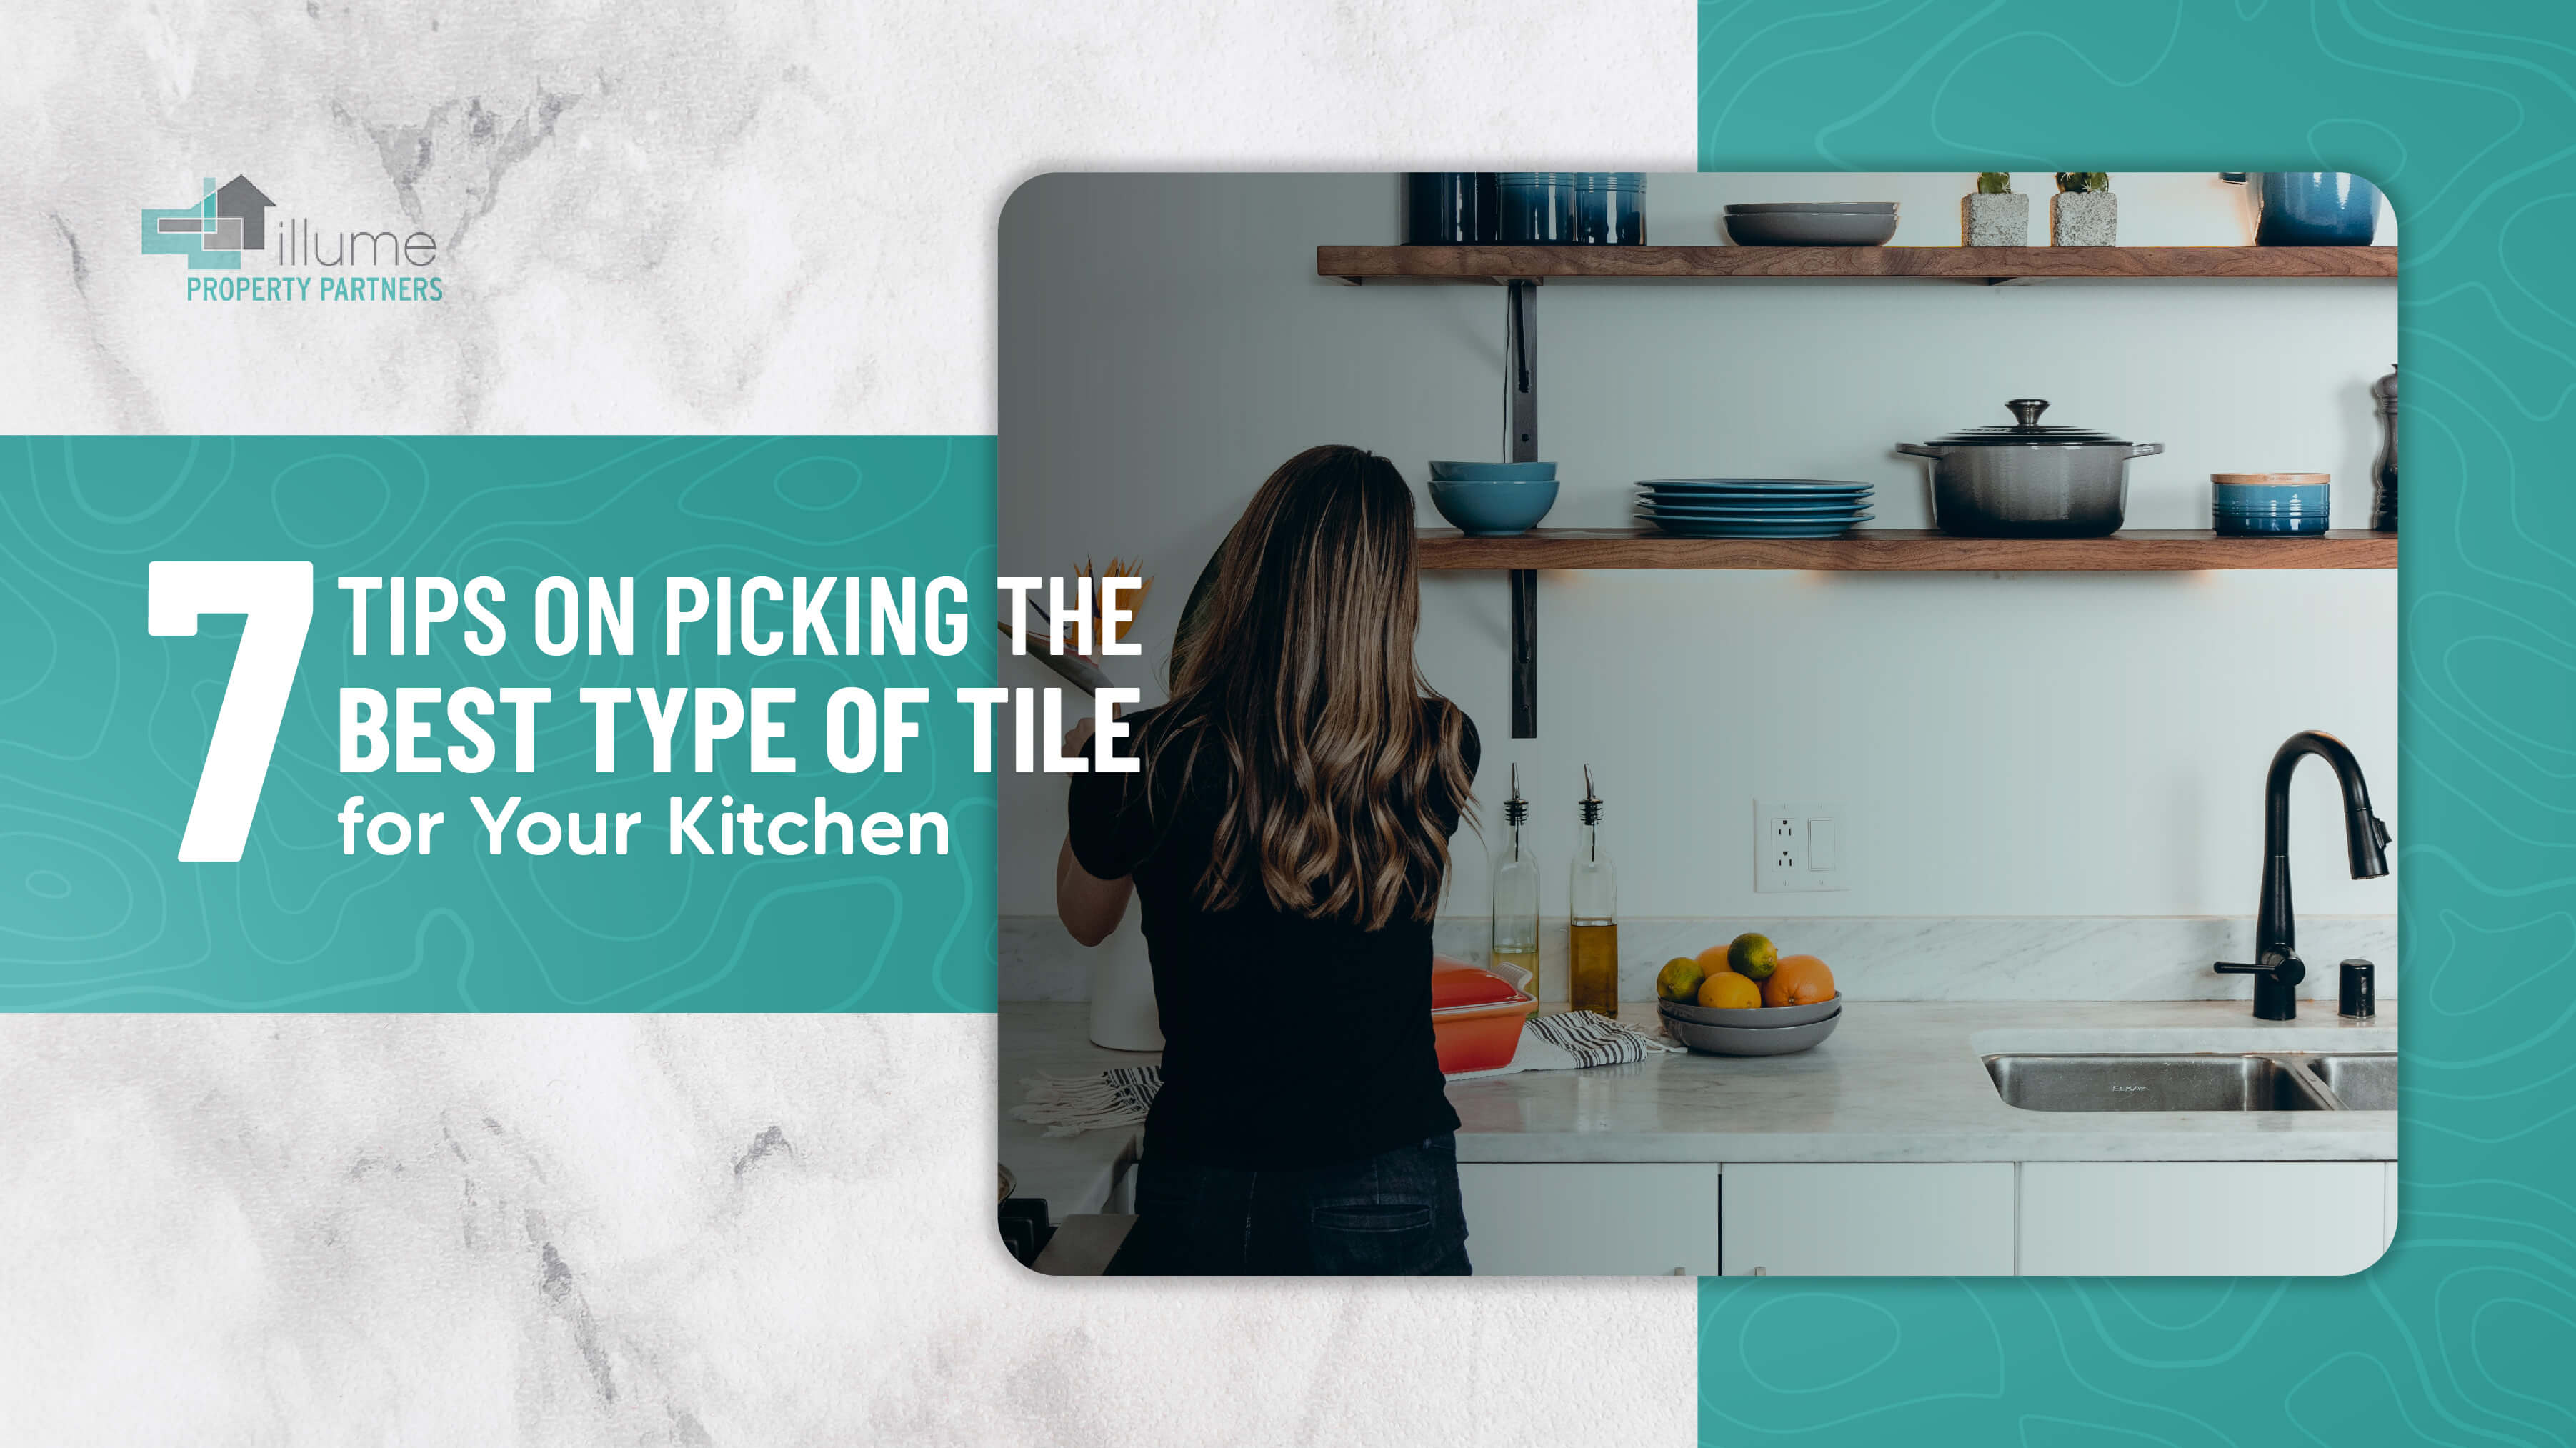 7 Tips on Picking the Best Type of Tile for Your Kitchen